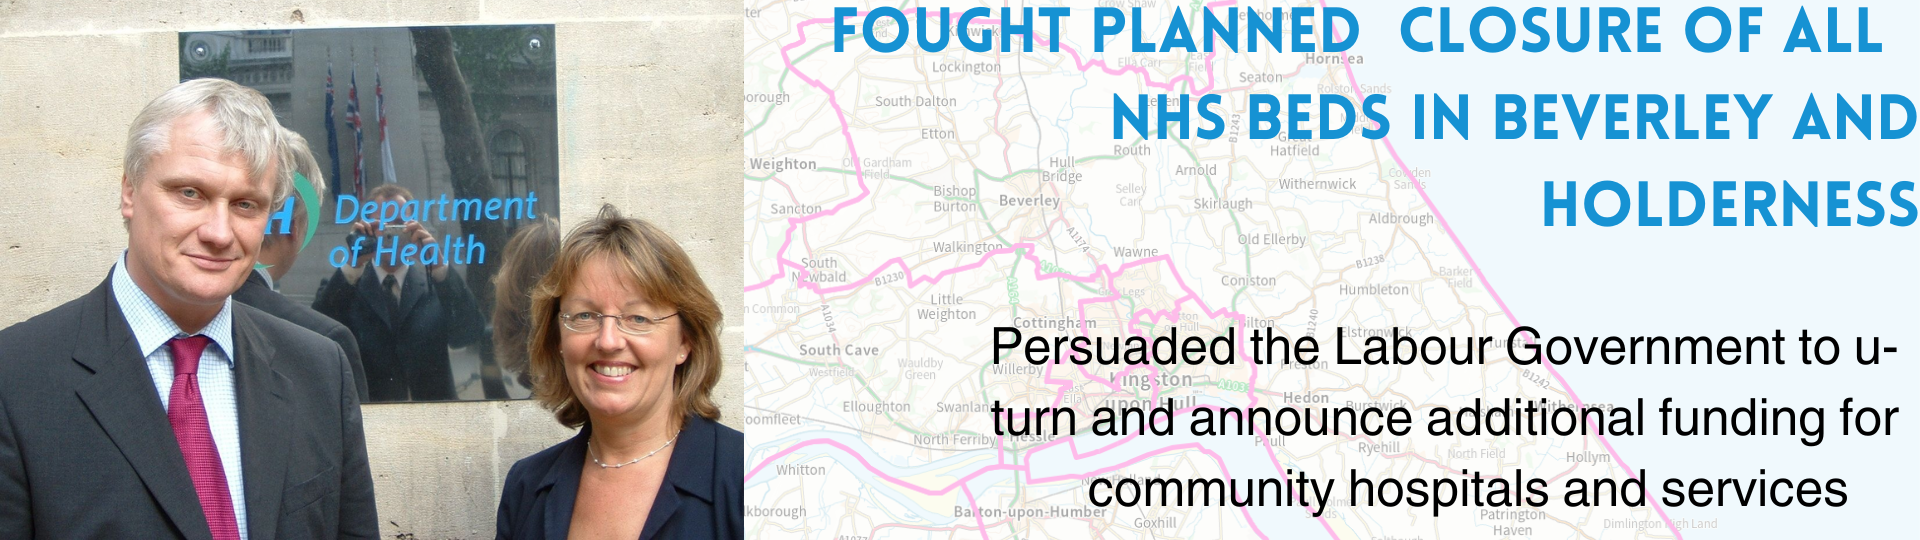 fought planned closure of all nhs beds in beverley and holderness.png